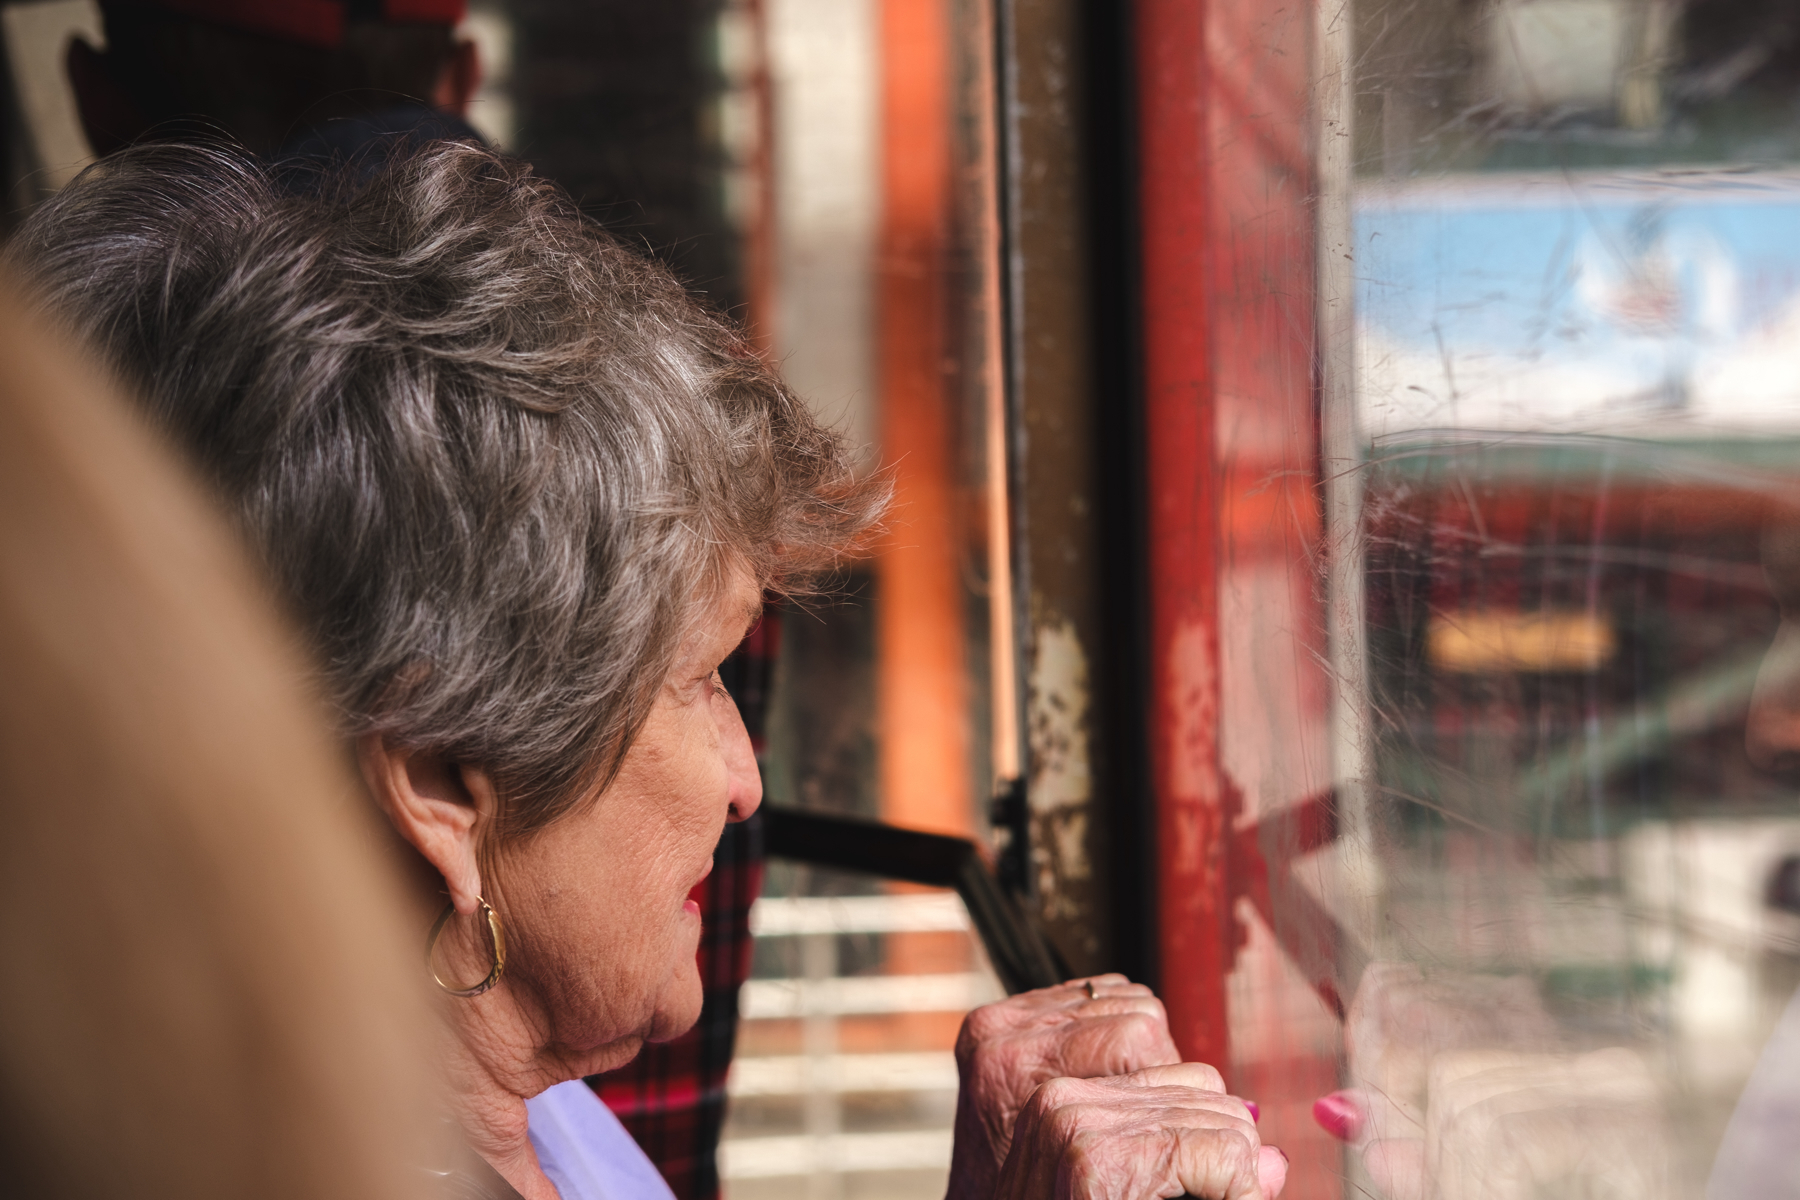 Woman with gray hair looking out of the window of a red cable car, with reflection visible on the glass.